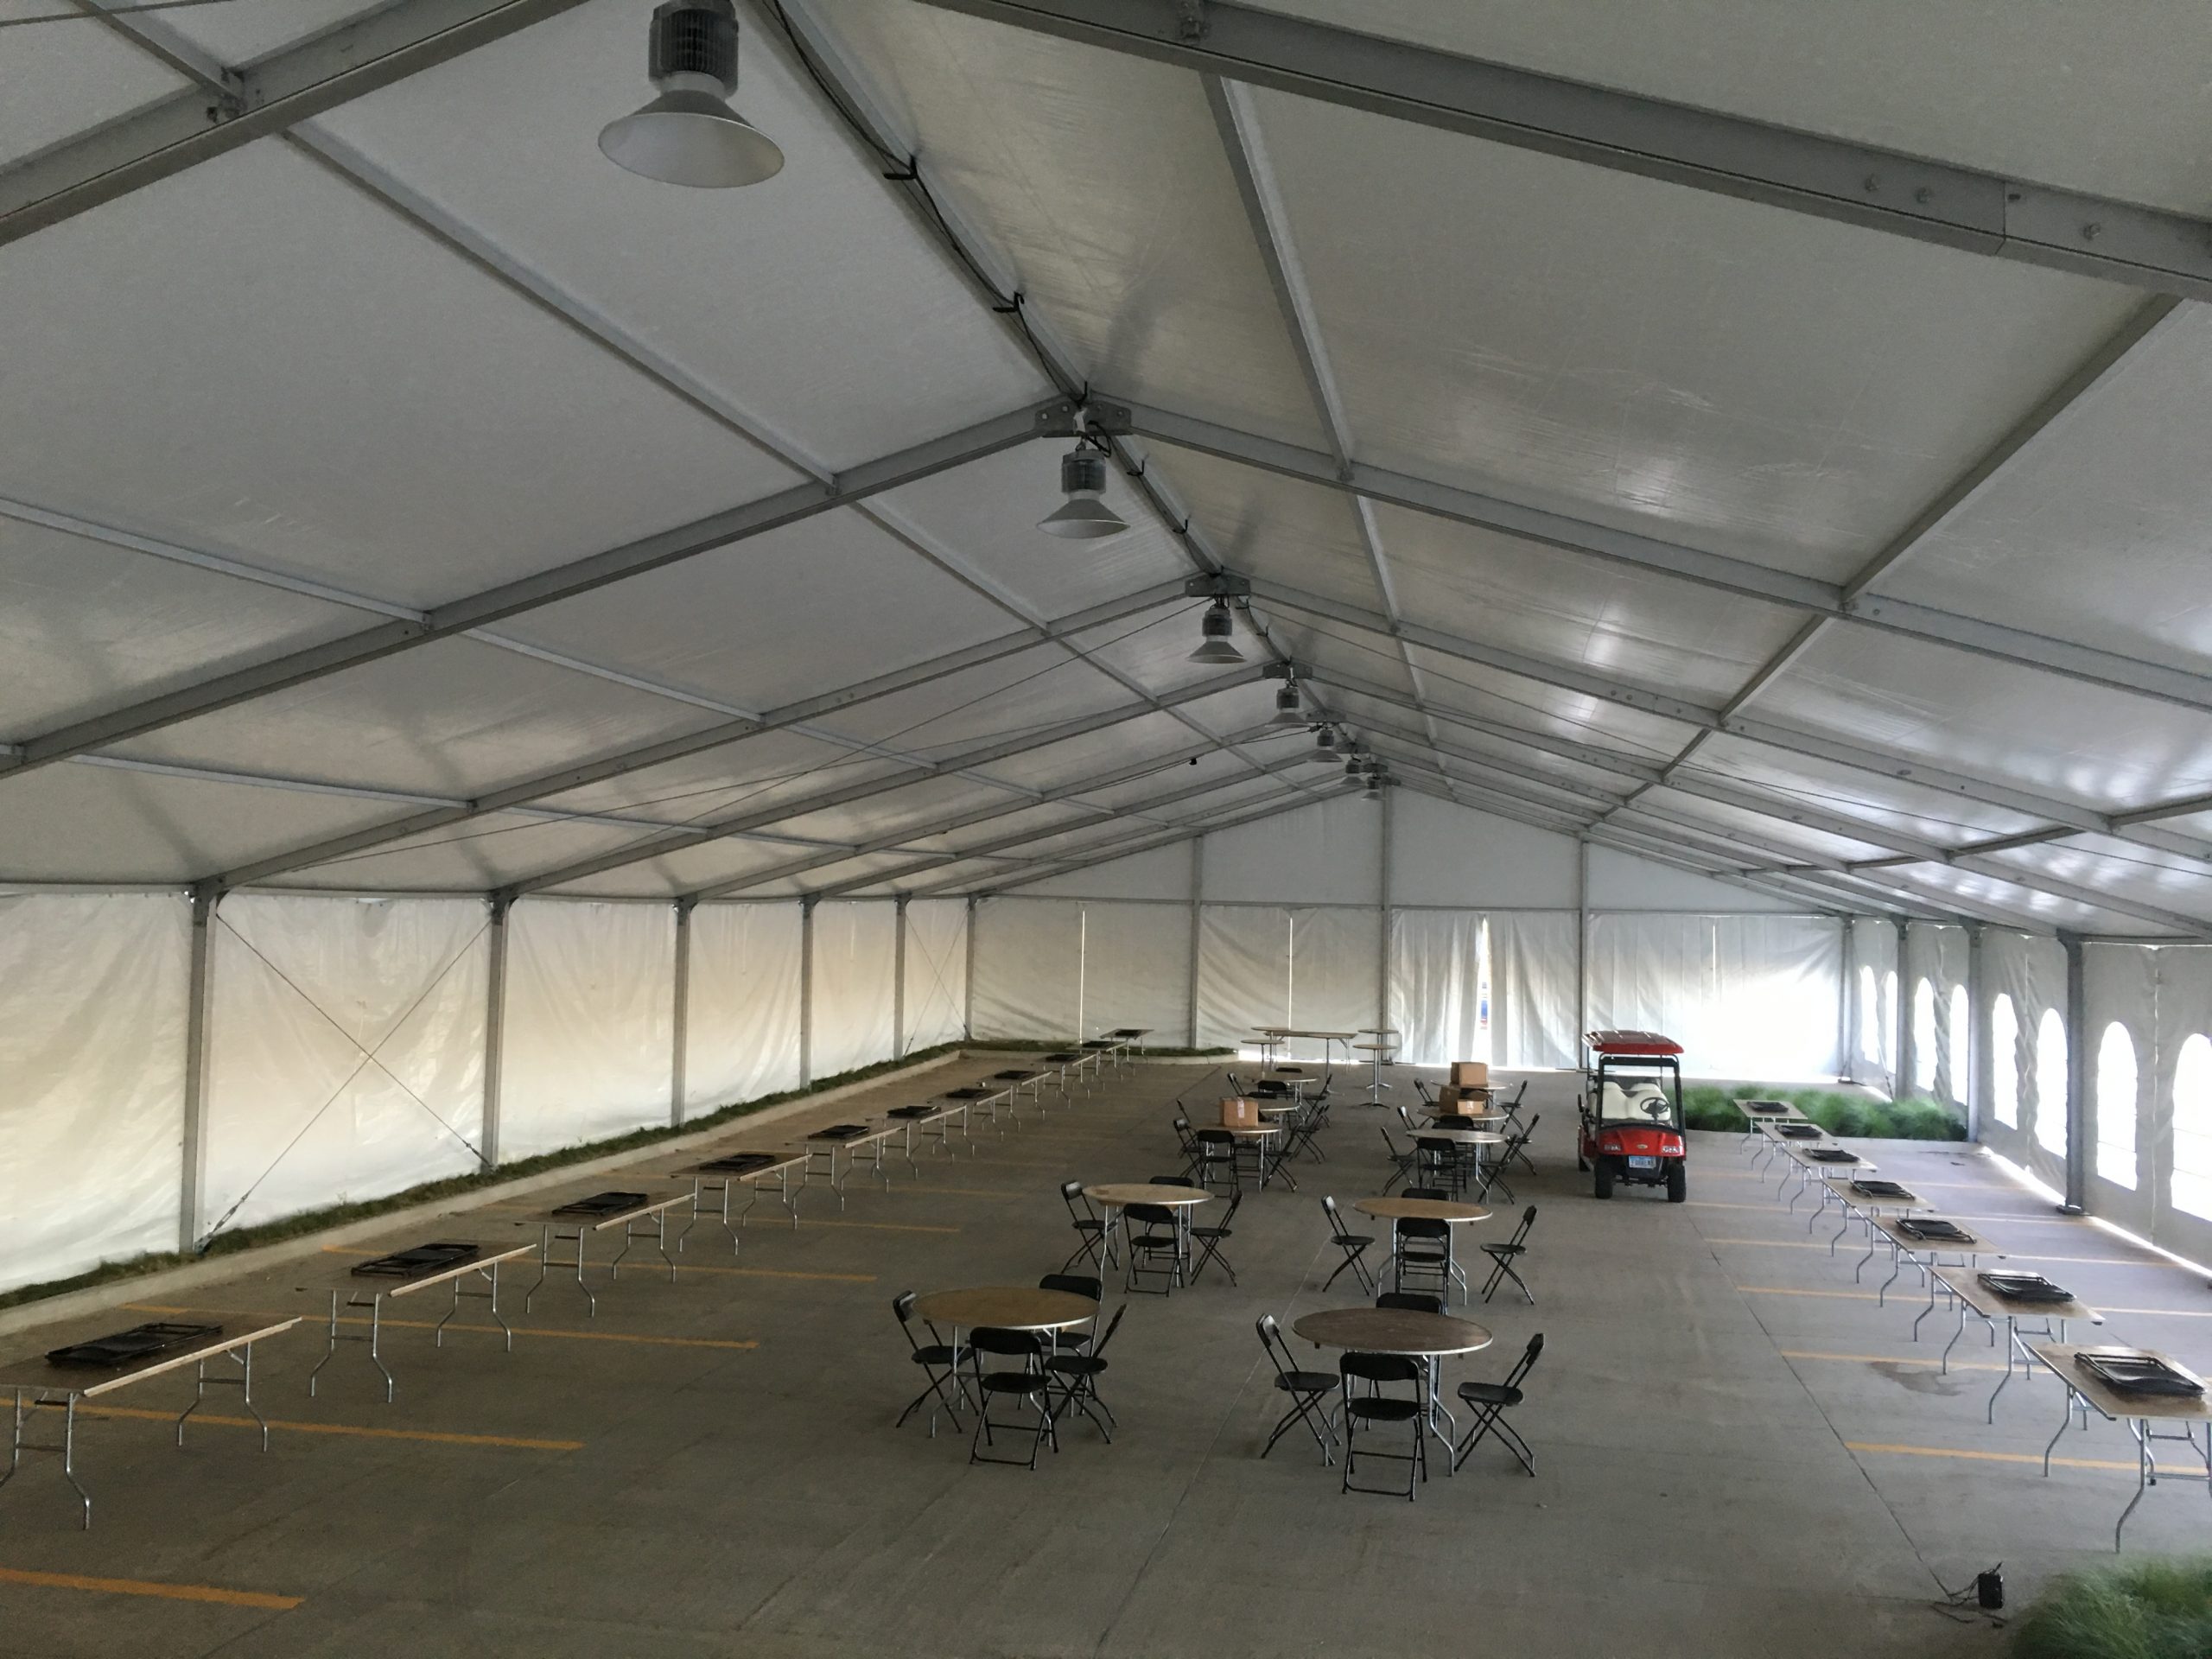 Inside the 60' x 131' Clearspan tent for the grand opening event of Brownells location in Grinnell, Iowa with lights